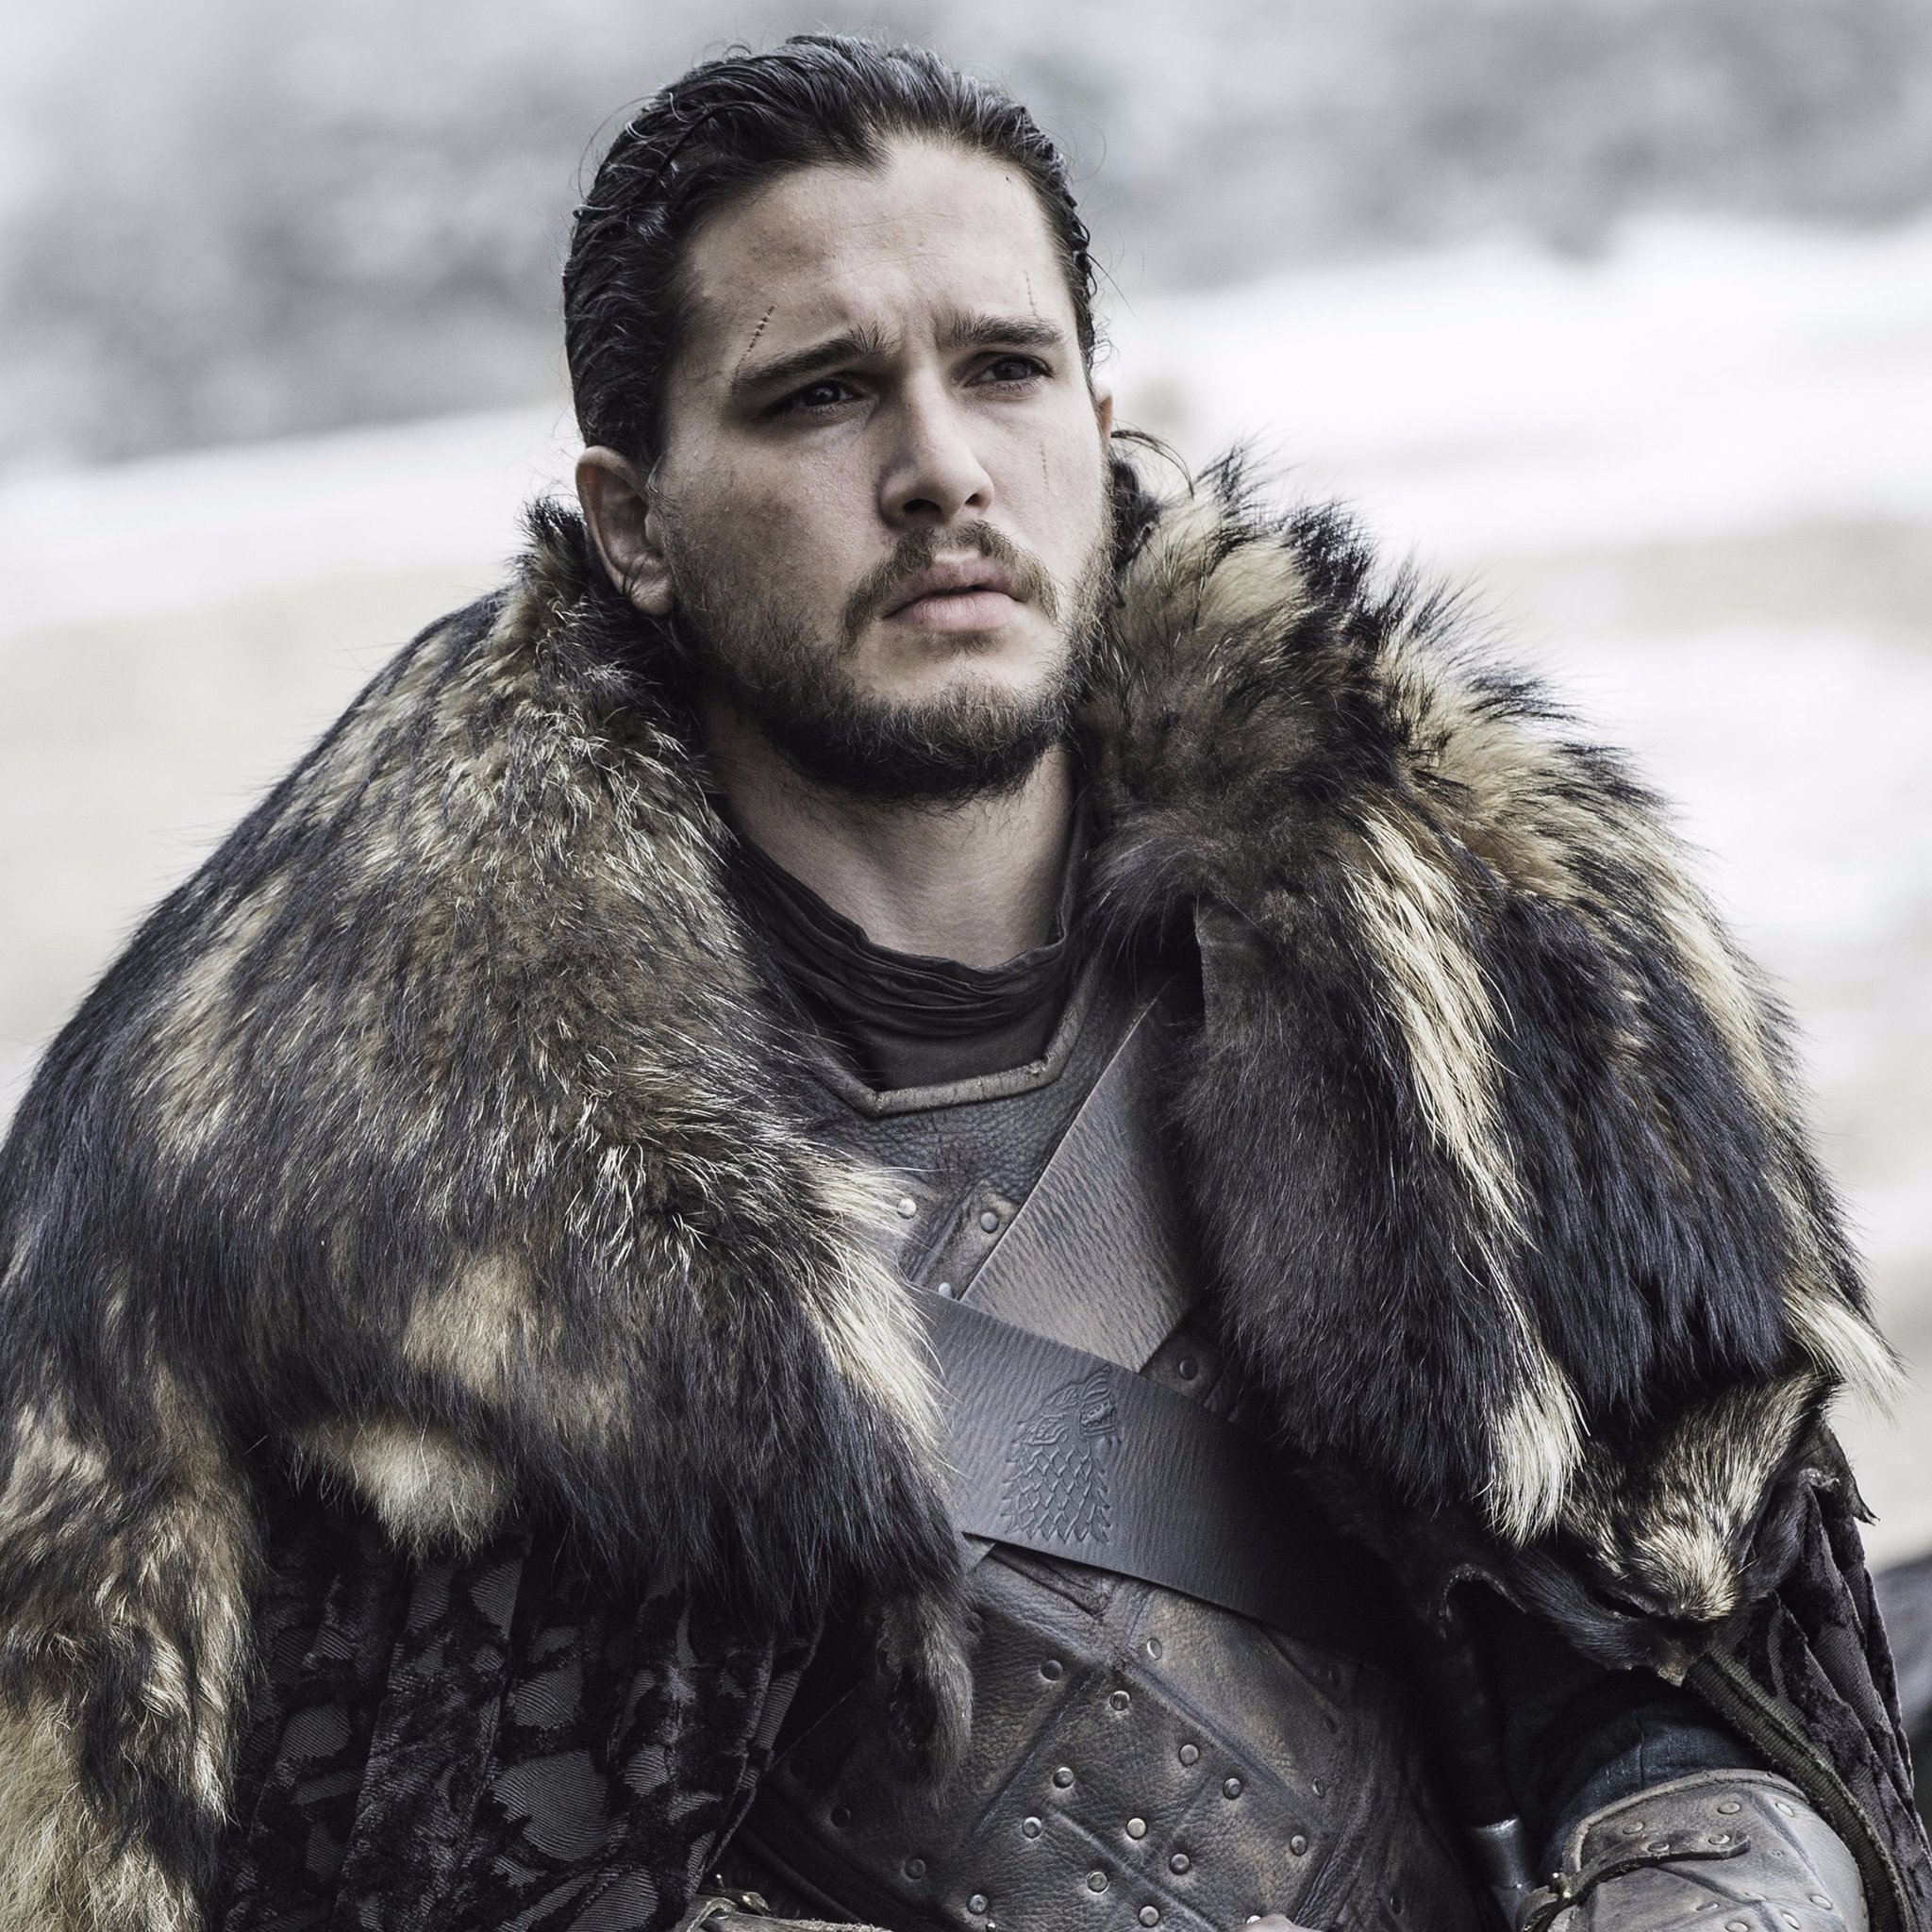 Who-Jon-Snow-Mother-Game-Thrones.png